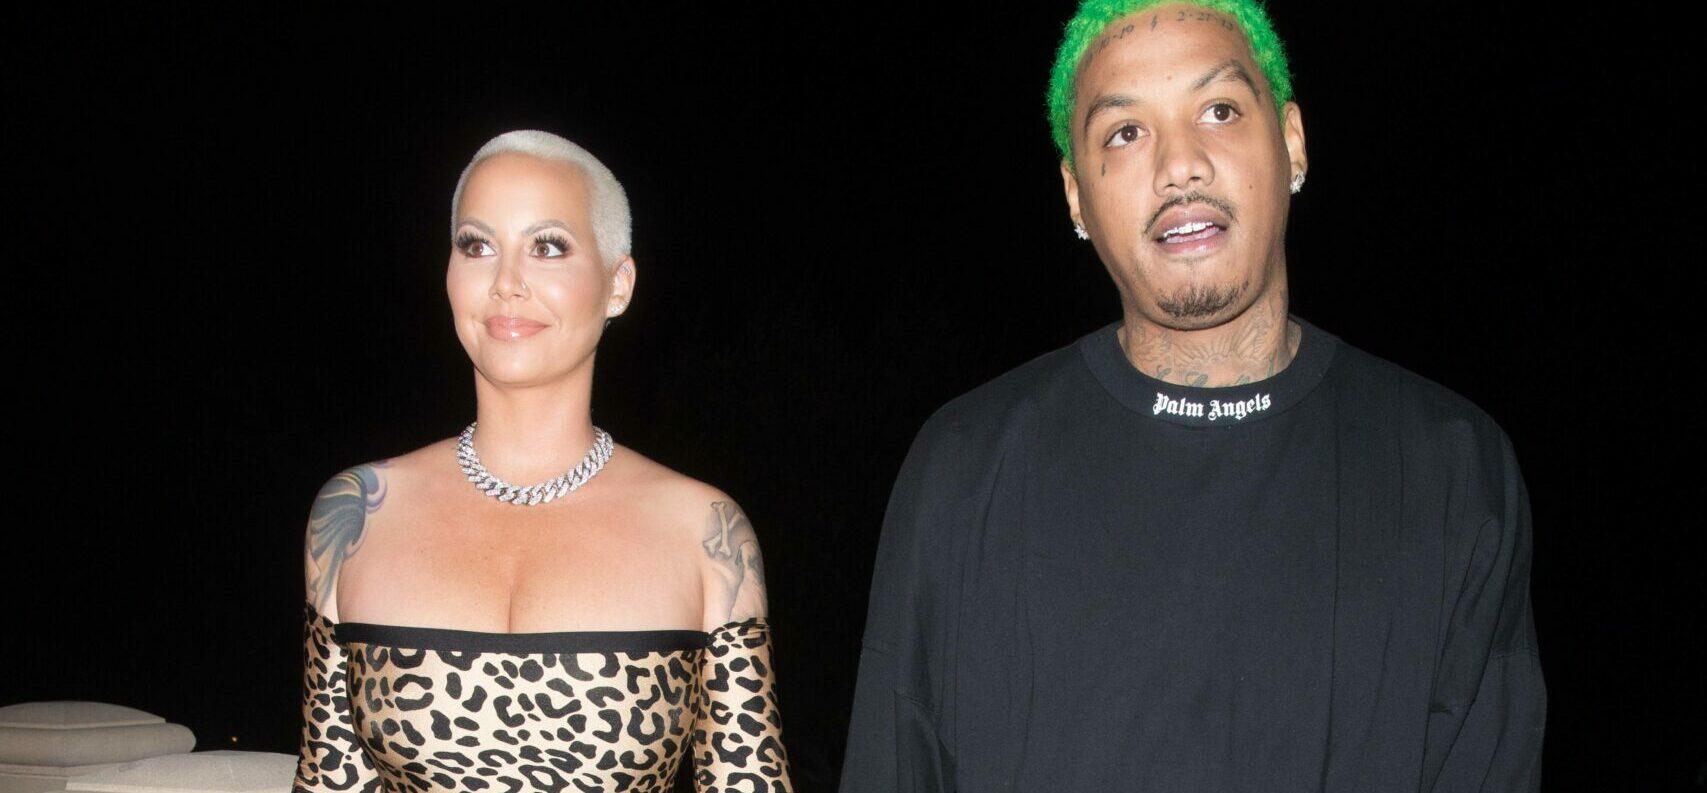 Amber Rose & Ex Alexander ‘AE’ Edwards Appear Super Friendly After Split From Cher